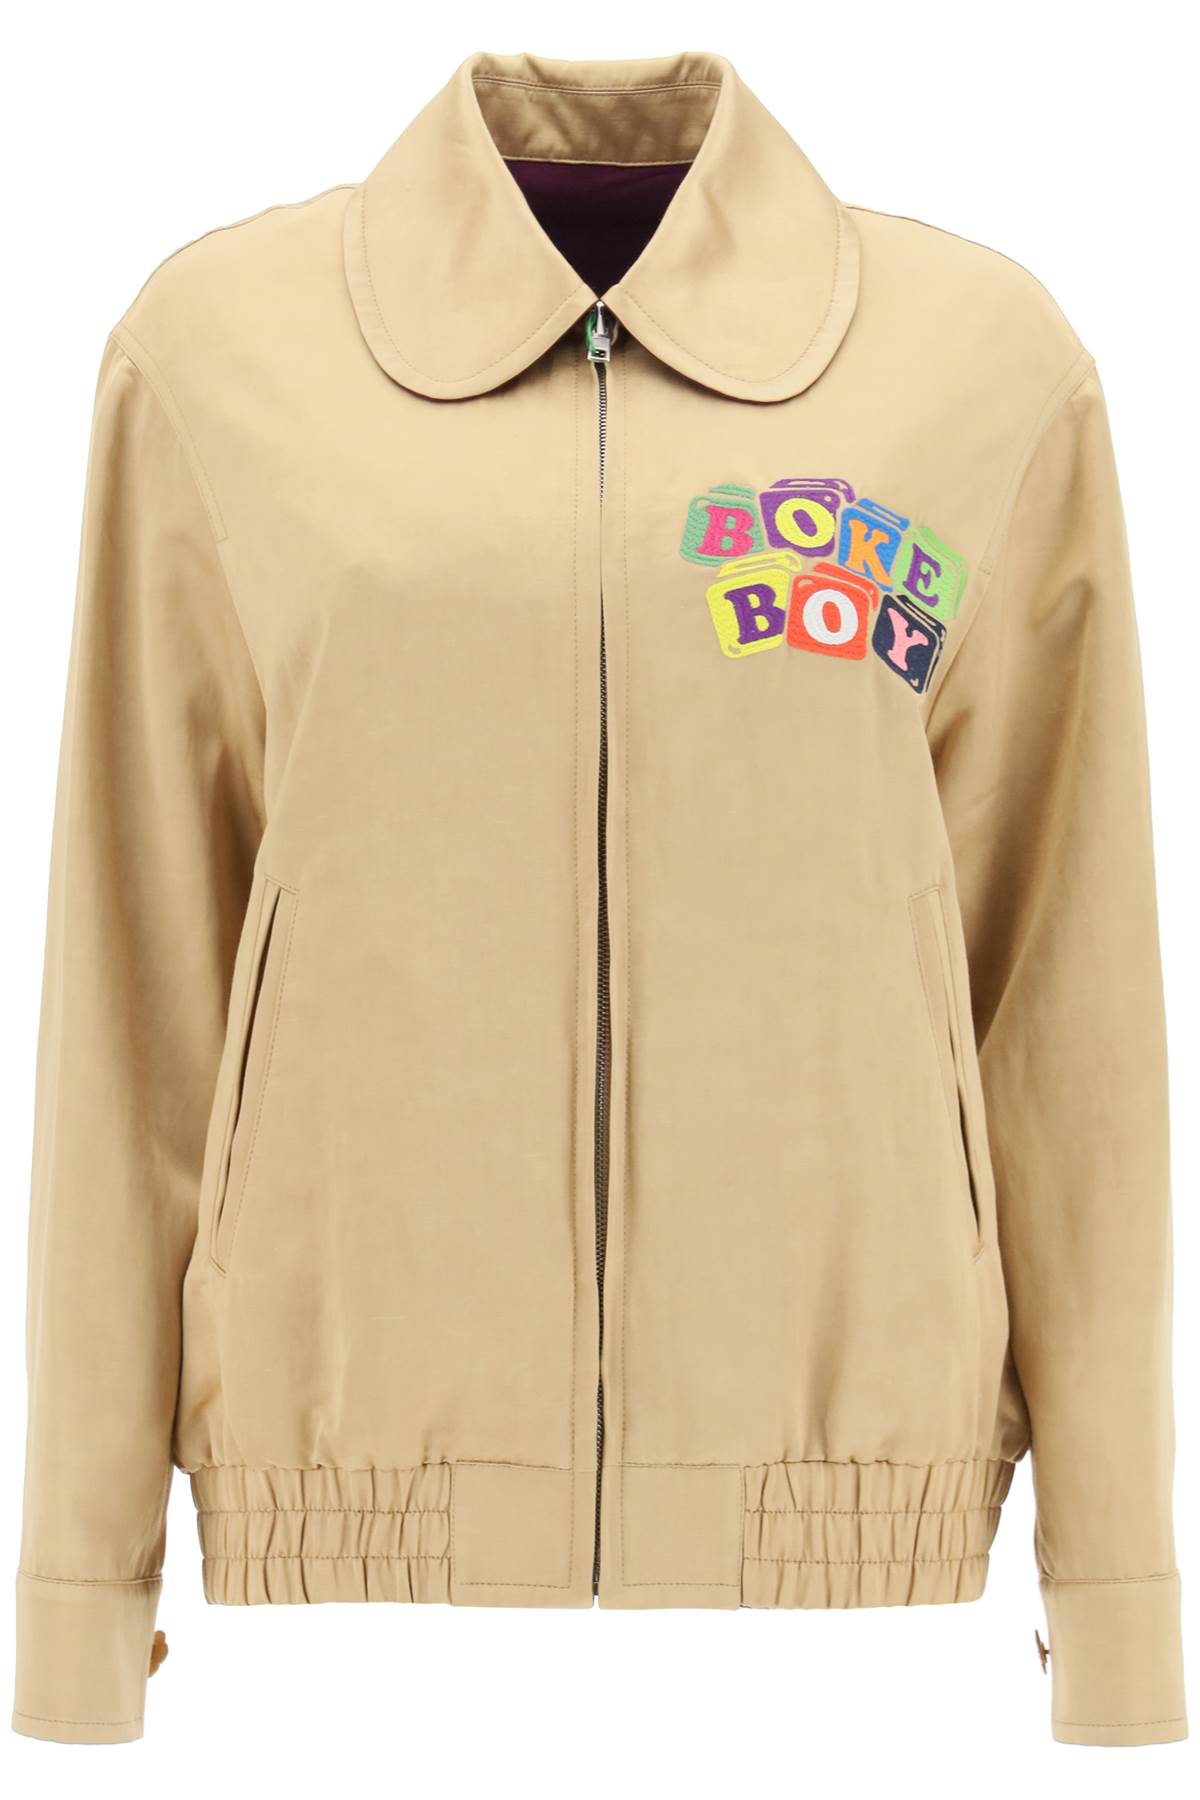 KENZO Reversible Bomber Jacket in Beige for Women - SS23 Collection